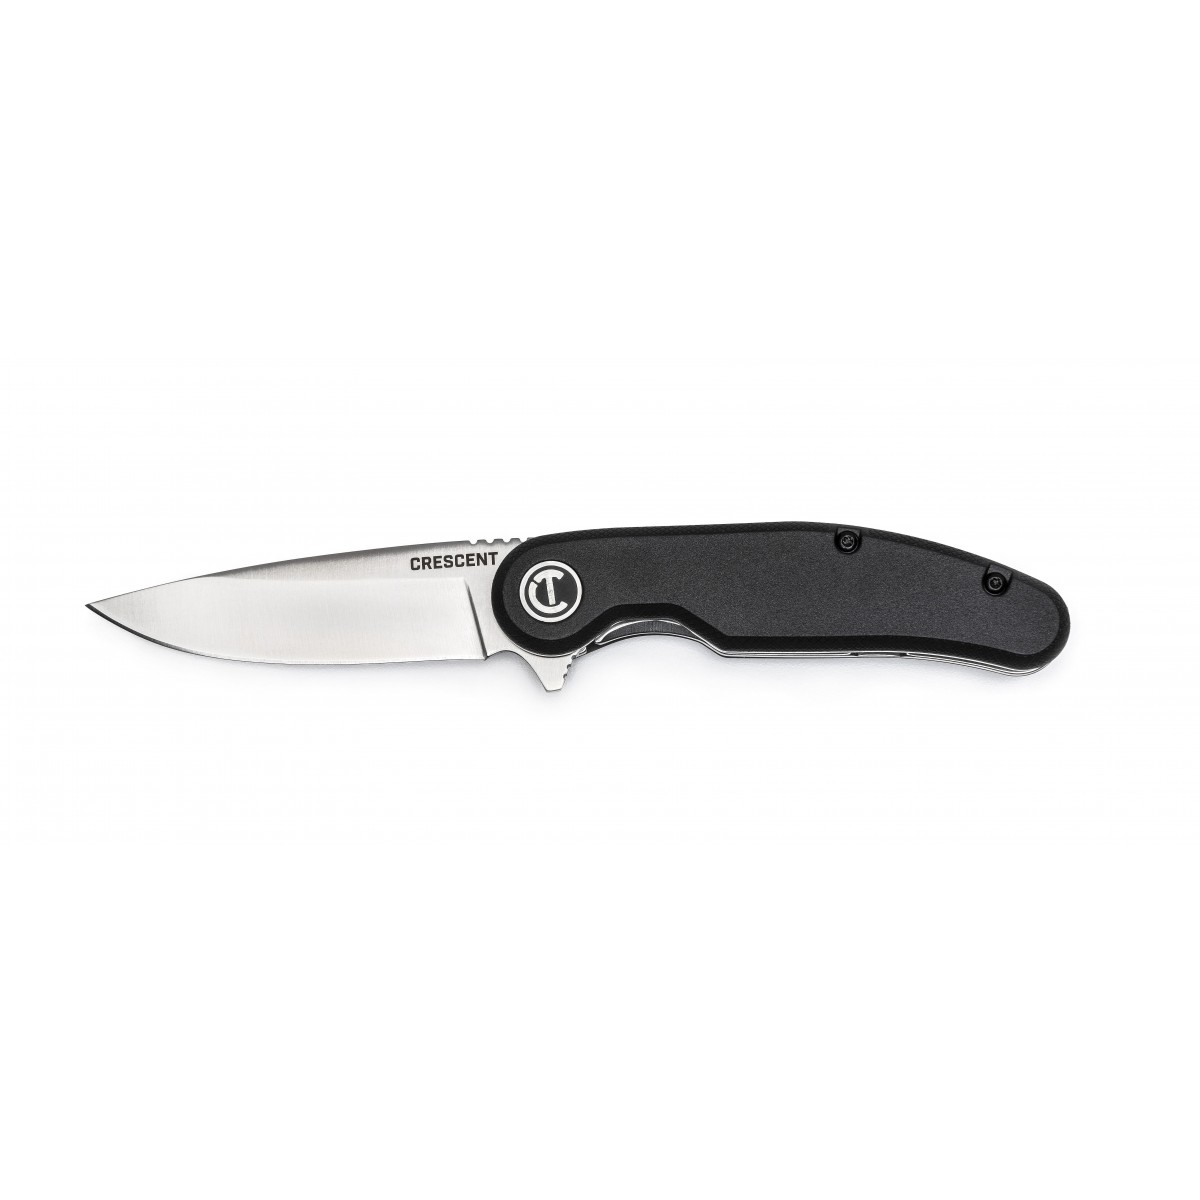 Crescent CPK325C Pocket Knife, 3-1/4 in L Blade, 1 in W Blade, Stainless Steel Blade, Straight, Ergonomic Handle